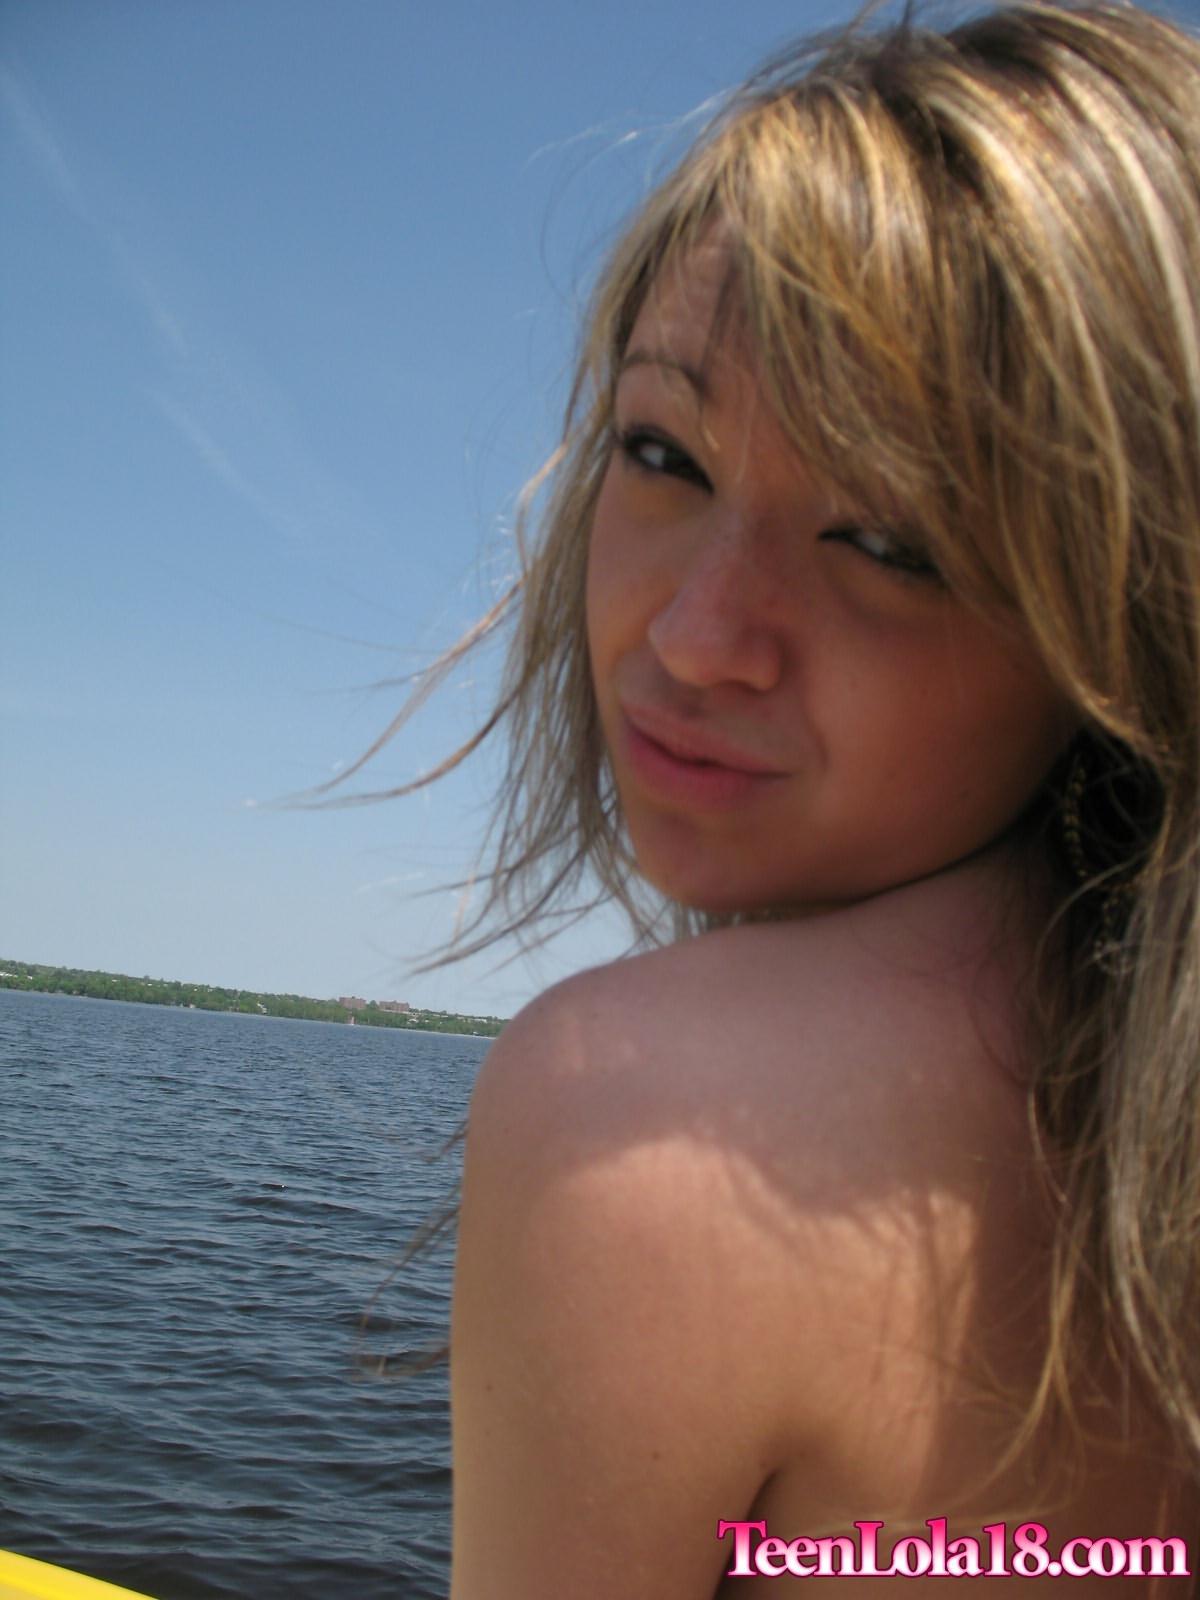 Pictures of Teen Lola 18 being dirty on a boat #60080531